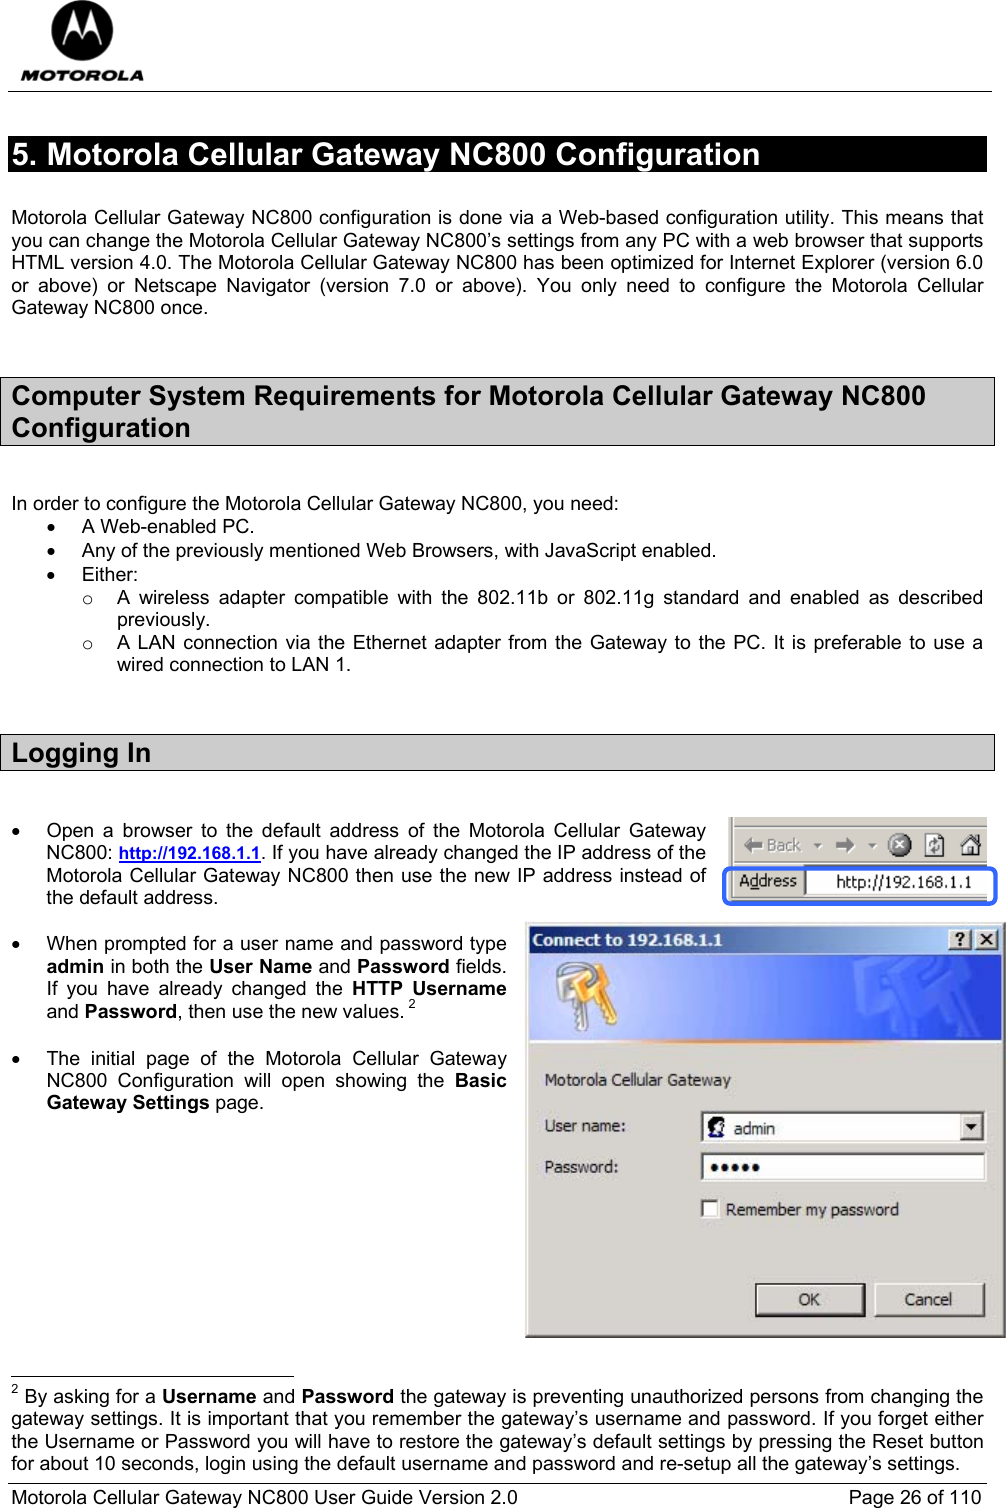  Motorola Cellular Gateway NC800 User Guide Version 2.0     Page 26 of 110  5. Motorola Cellular Gateway NC800 Configuration   Motorola Cellular Gateway NC800 configuration is done via a Web-based configuration utility. This means that you can change the Motorola Cellular Gateway NC800’s settings from any PC with a web browser that supports HTML version 4.0. The Motorola Cellular Gateway NC800 has been optimized for Internet Explorer (version 6.0 or above) or Netscape Navigator (version 7.0 or above). You only need to configure the Motorola Cellular Gateway NC800 once.  Computer System Requirements for Motorola Cellular Gateway NC800 Configuration  In order to configure the Motorola Cellular Gateway NC800, you need: •  A Web-enabled PC. •  Any of the previously mentioned Web Browsers, with JavaScript enabled. • Either: o  A wireless adapter compatible with the 802.11b or 802.11g standard and enabled as described previously. o  A LAN connection via the Ethernet adapter from the Gateway to the PC. It is preferable to use a wired connection to LAN 1.  Logging In   •  Open a browser to the default address of the Motorola Cellular Gateway NC800: http://192.168.1.1. If you have already changed the IP address of the Motorola Cellular Gateway NC800 then use the new IP address instead of the default address.    •  When prompted for a user name and password type admin in both the User Name and Password fields. If you have already changed the HTTP Username and Password, then use the new values. 2  •  The initial page of the Motorola Cellular Gateway NC800 Configuration will open showing the Basic Gateway Settings page.                                                                  2 By asking for a Username and Password the gateway is preventing unauthorized persons from changing the gateway settings. It is important that you remember the gateway’s username and password. If you forget either the Username or Password you will have to restore the gateway’s default settings by pressing the Reset button for about 10 seconds, login using the default username and password and re-setup all the gateway’s settings. 